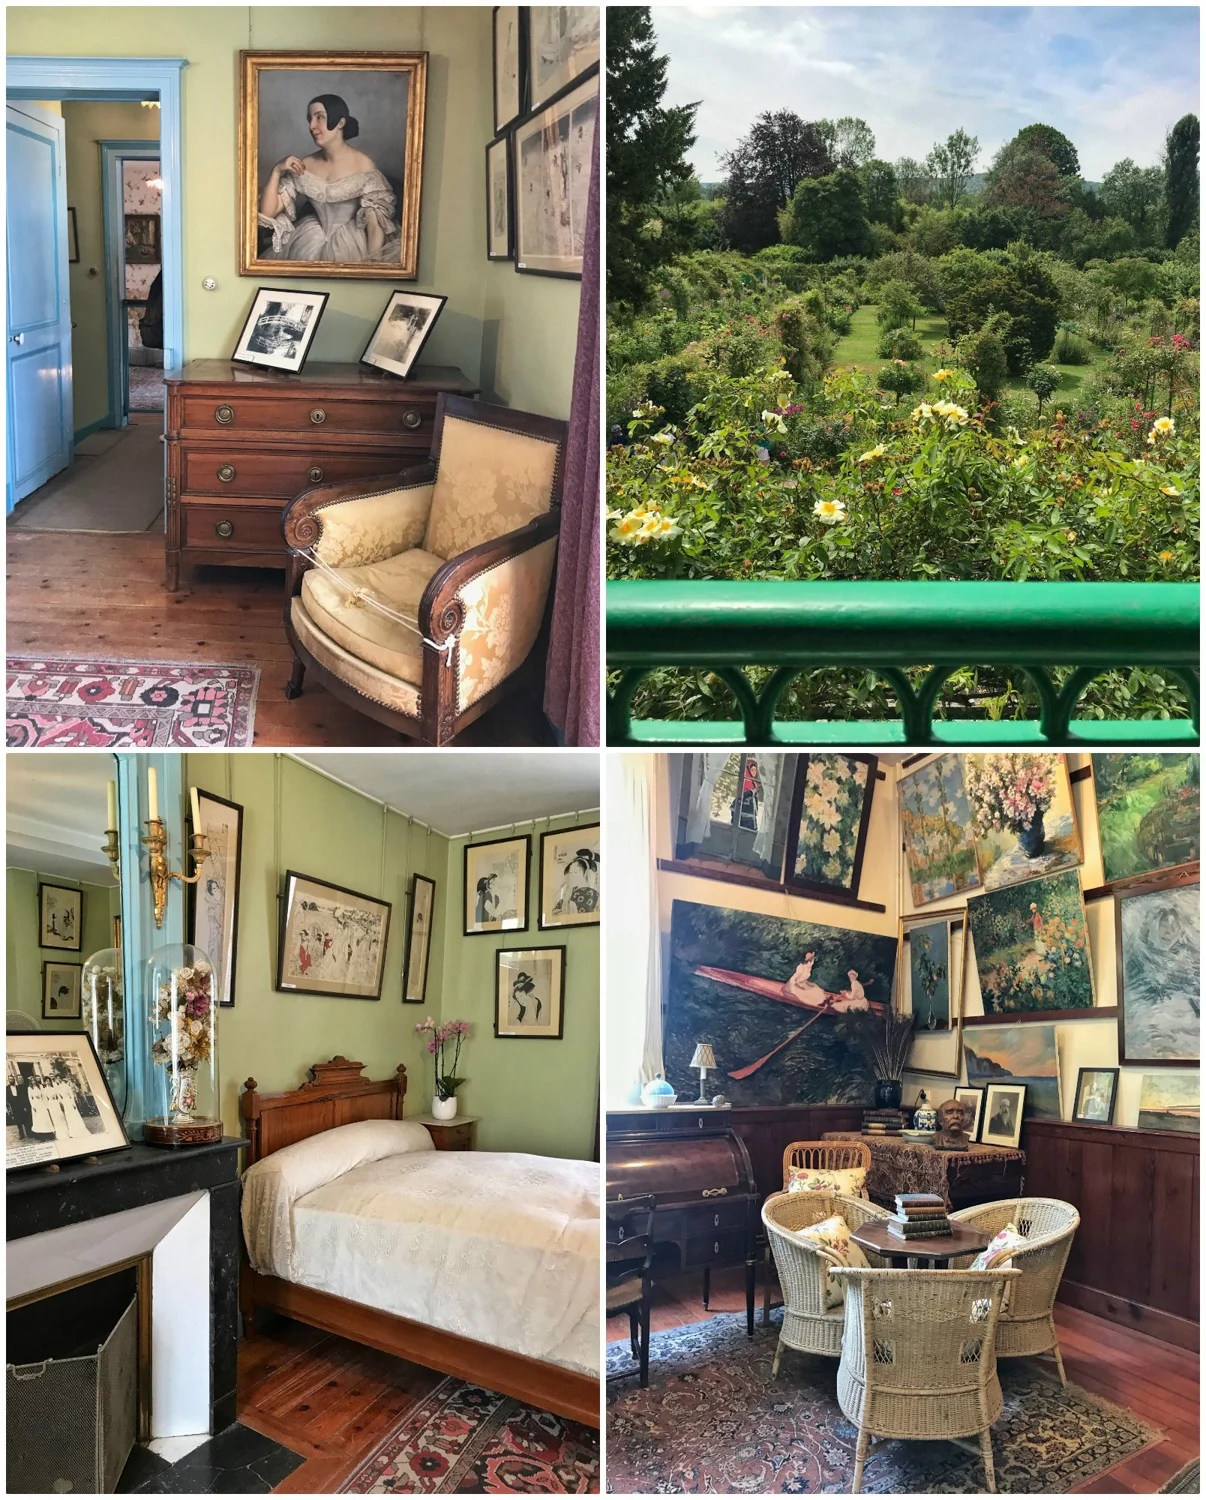 Monet House and garden in Giverny Photo Heatheronhertravels.com